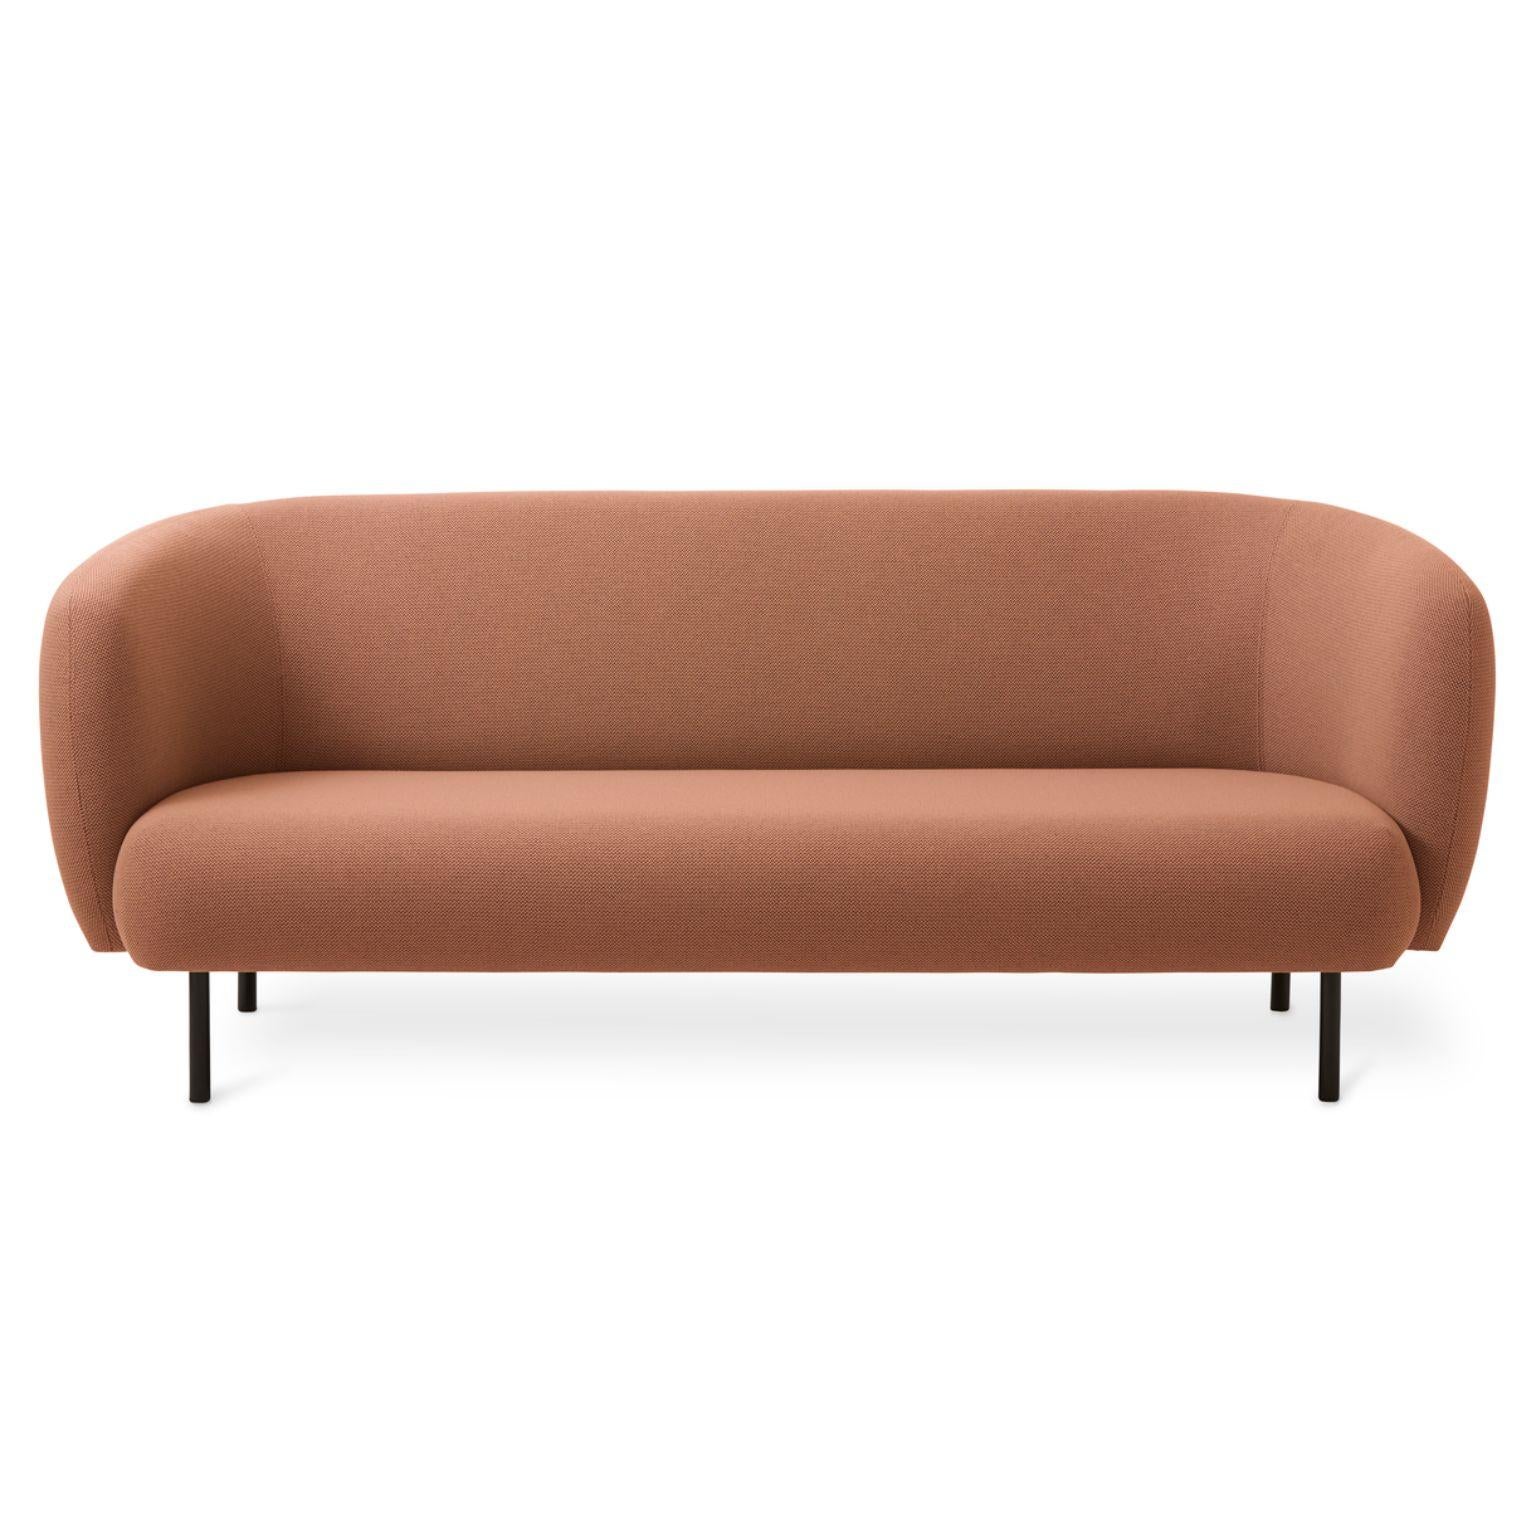 Caper 3 seater fresh peach by Warm Nordic
Dimensions: D 206 x W 84 x H 63 cm
Material: Textile upholstery, Wooden frame, Powder coated black steel legs.
Weight: 55.5 kg
Also available in different colours and finishes.

An elegant sofa with an